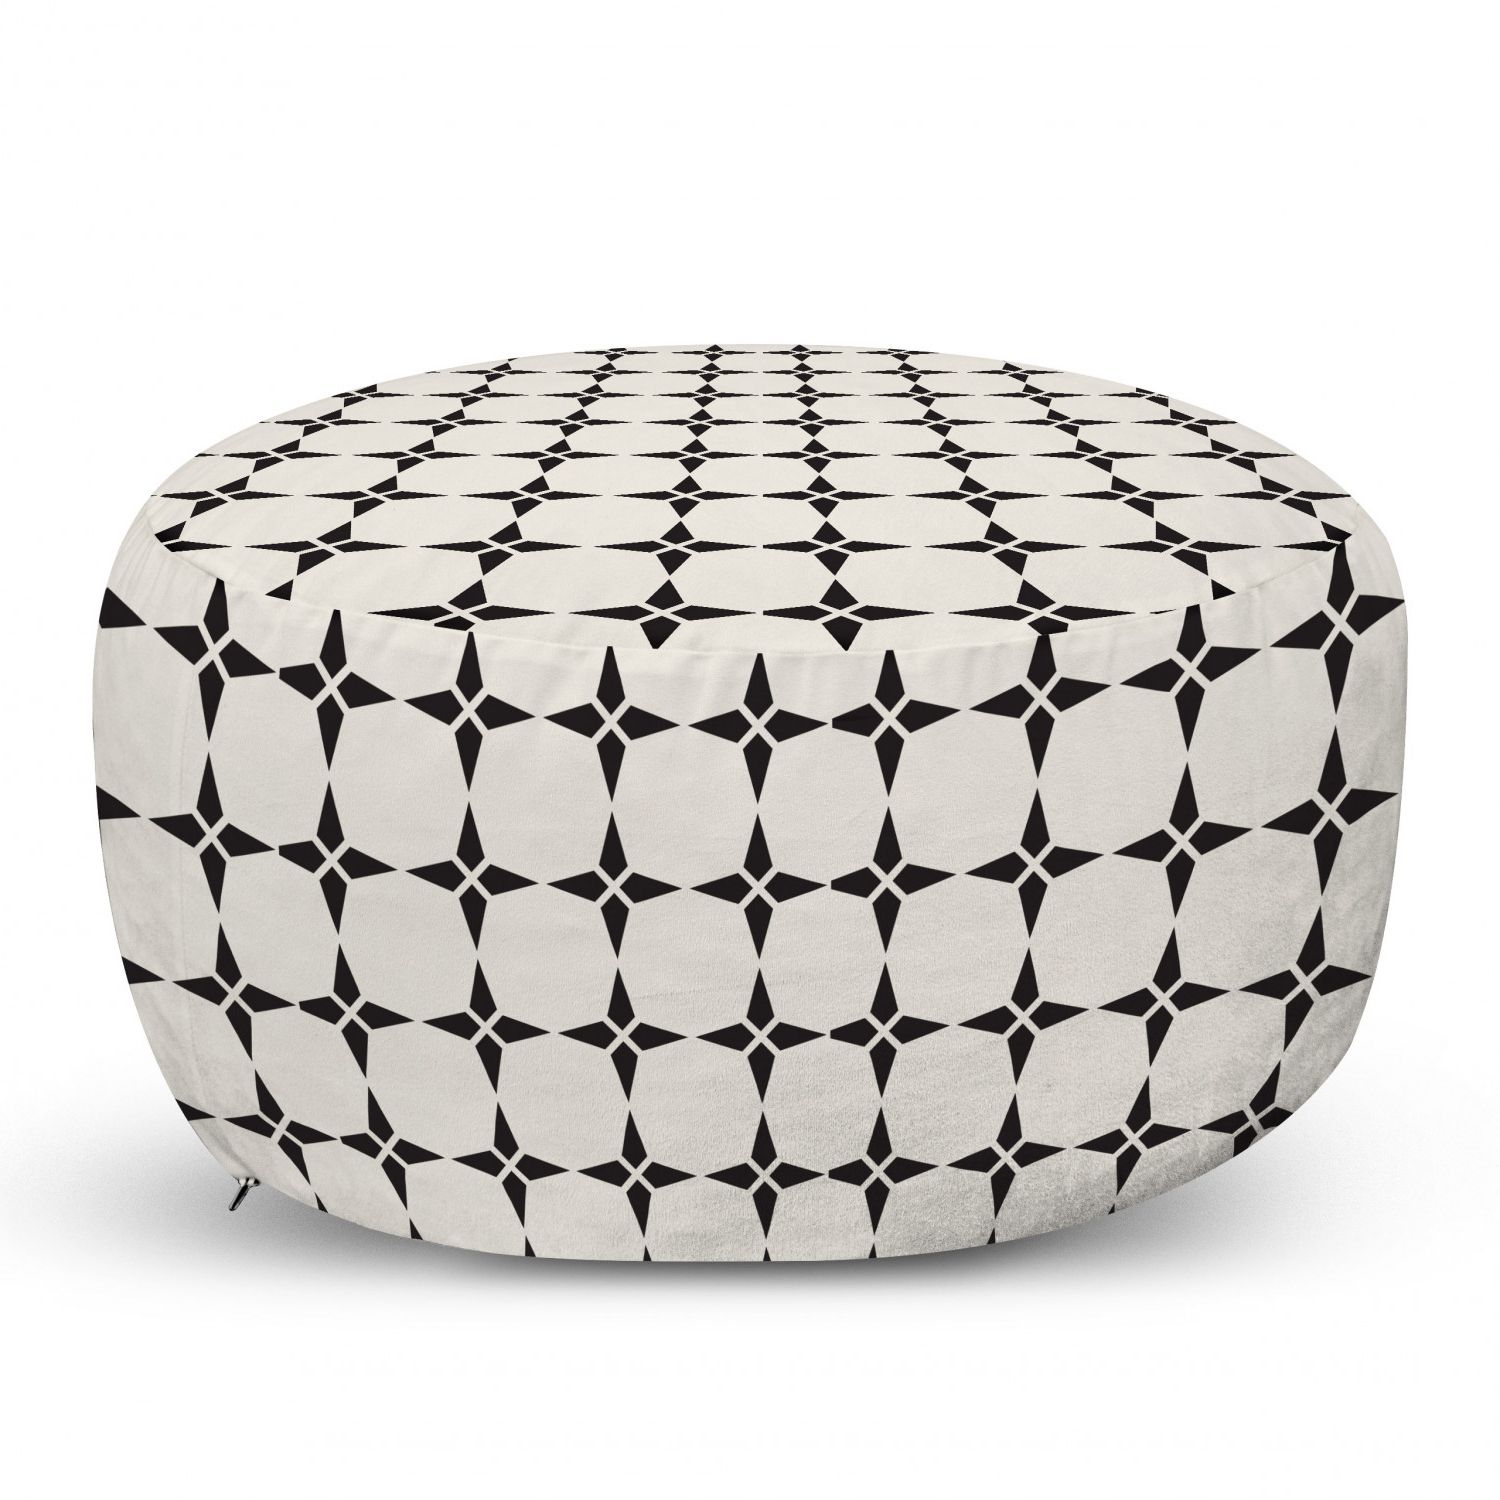 Most Popular Soft Ivory Geometric Ottomans Pertaining To Geometric Pouf Cover With Zipper, Pattern Star Shapes Contemporary Style  Modern Design, Soft Decorative Fabric Unstuffed Case, 30" W X  (View 8 of 10)